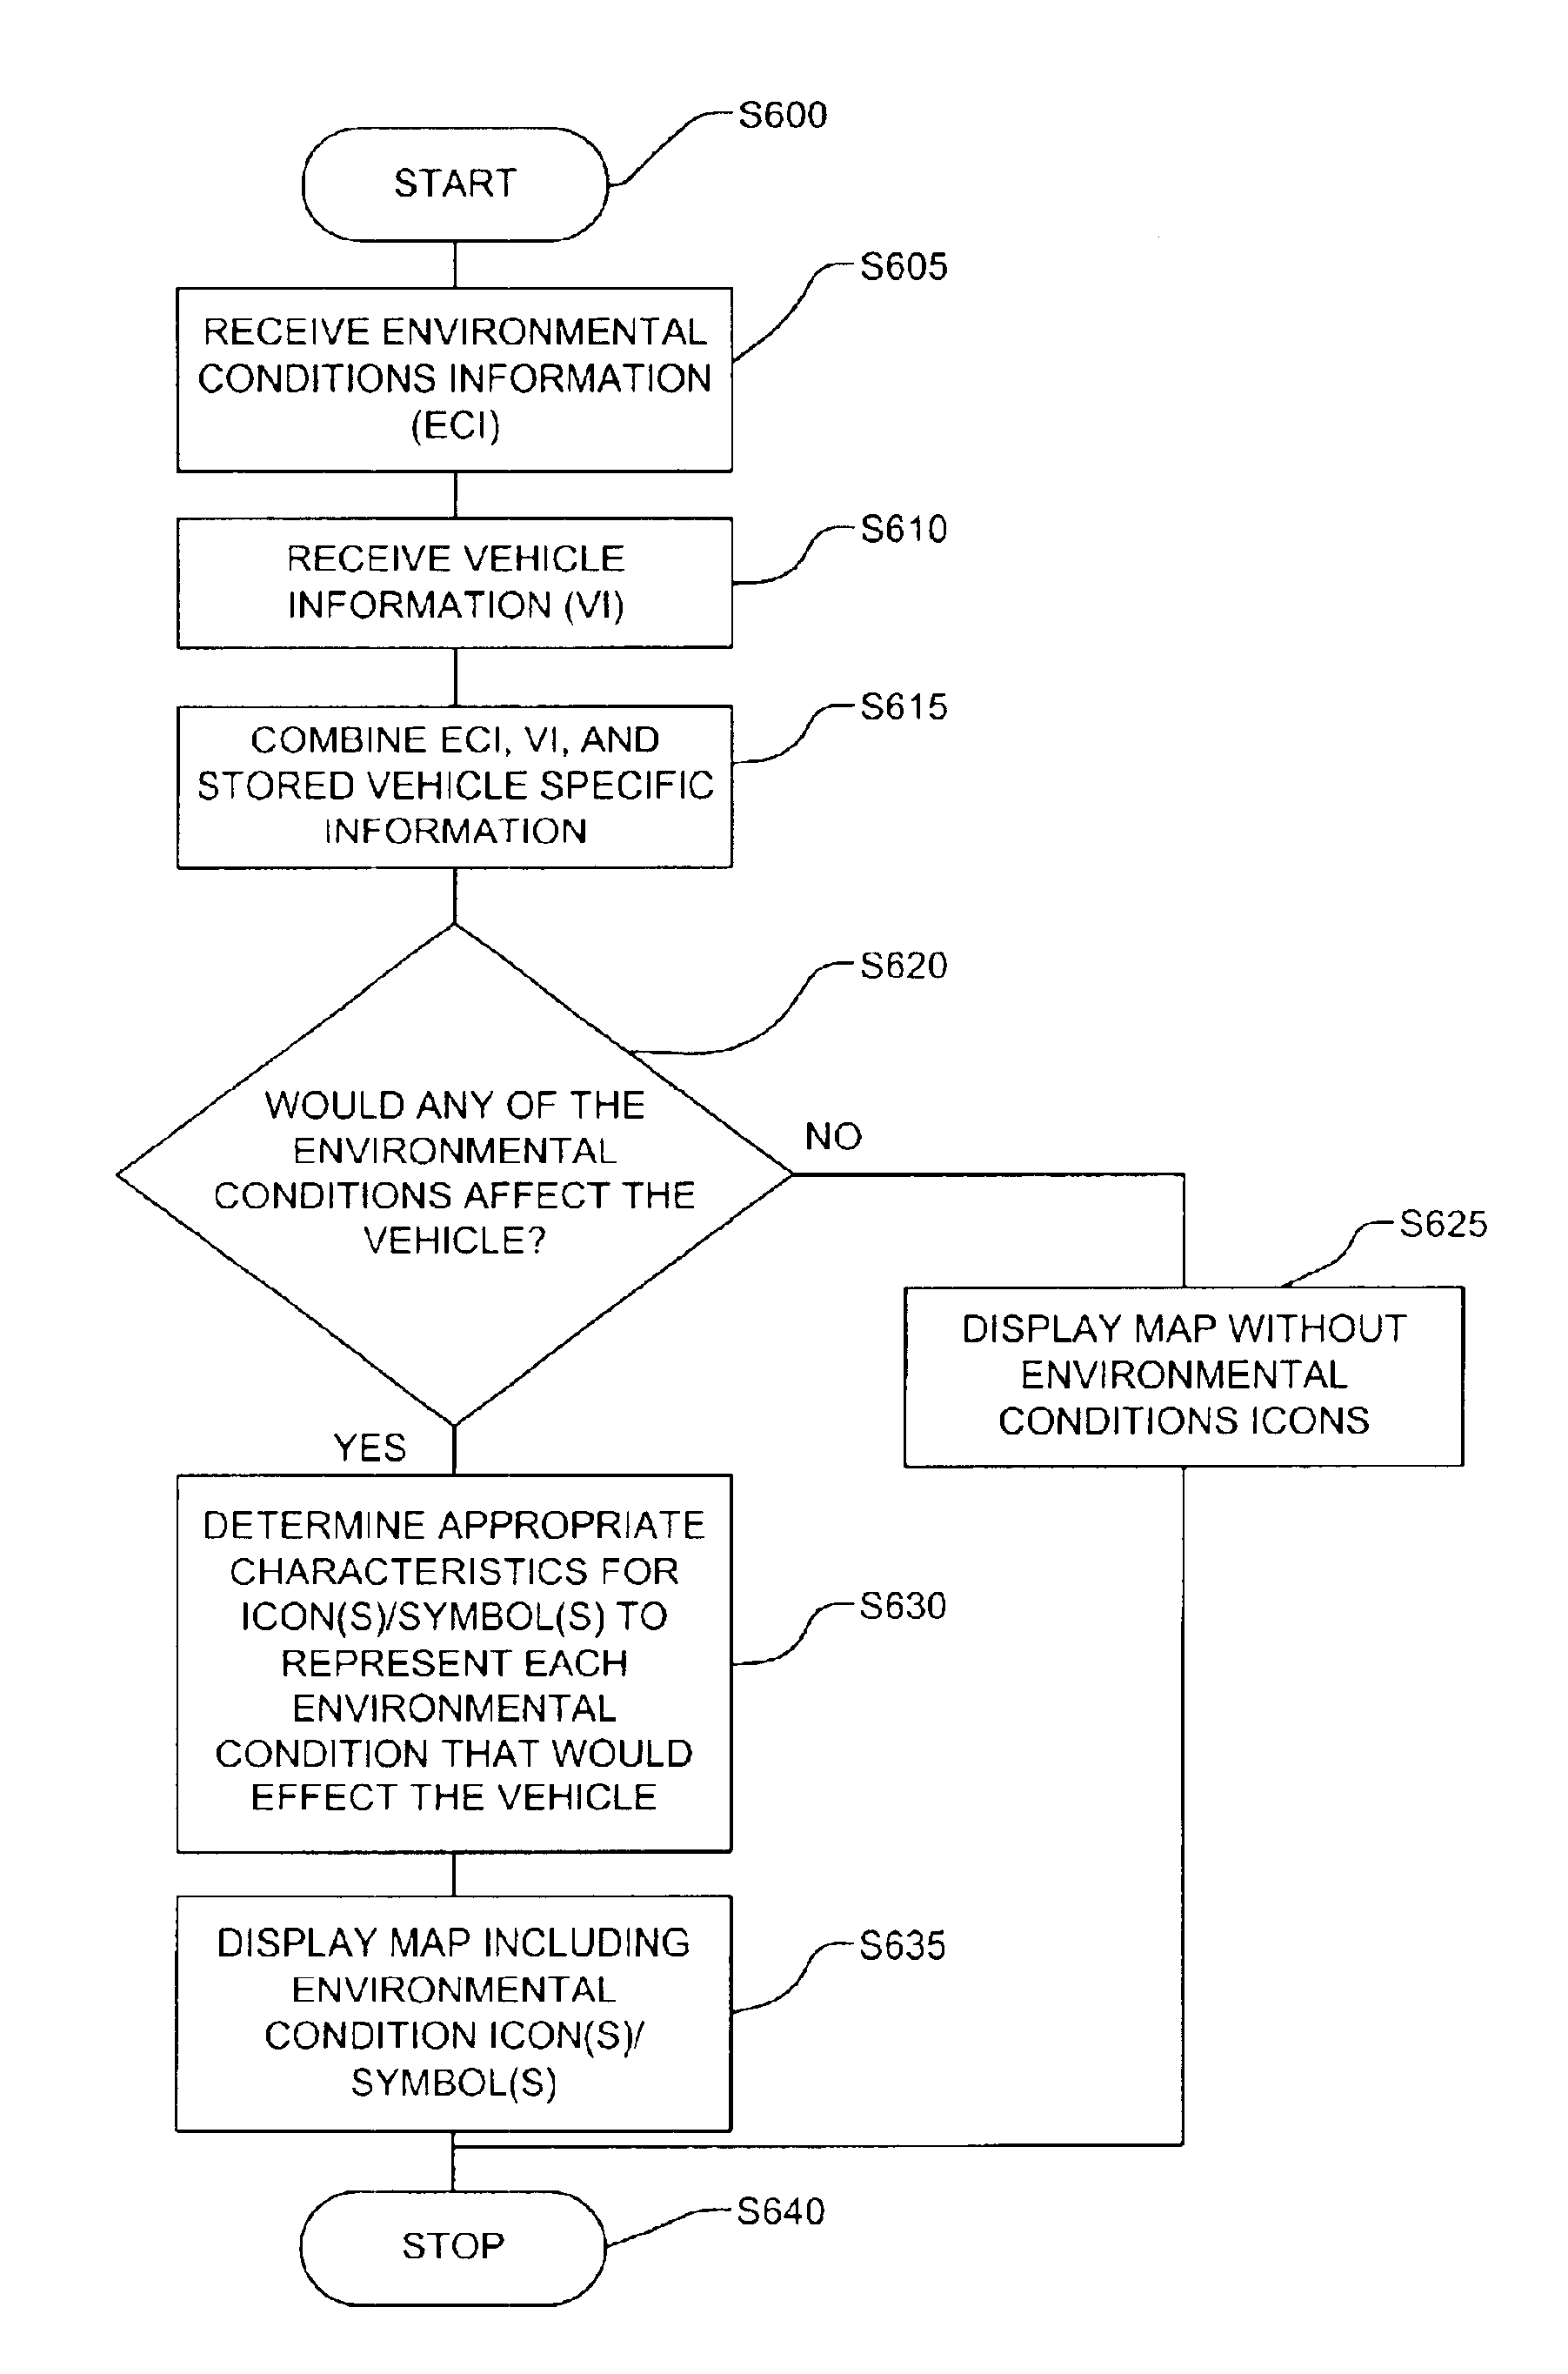 Transmission, receipt, and presentation of vehicle specific environmental conditions and hazards information